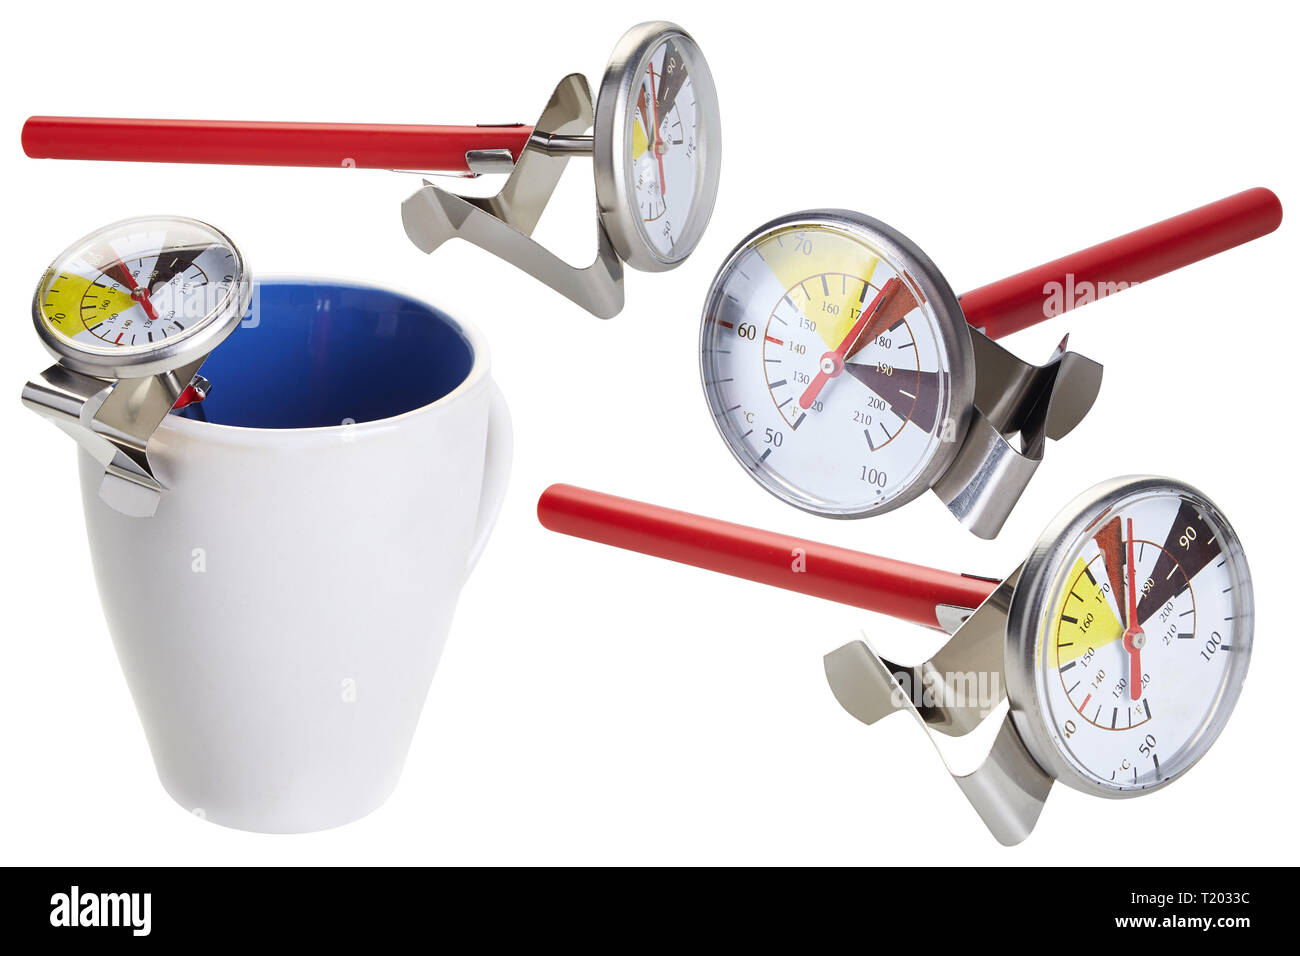 Milk & Coffee Thermometer with Clip - Coffee Accessories